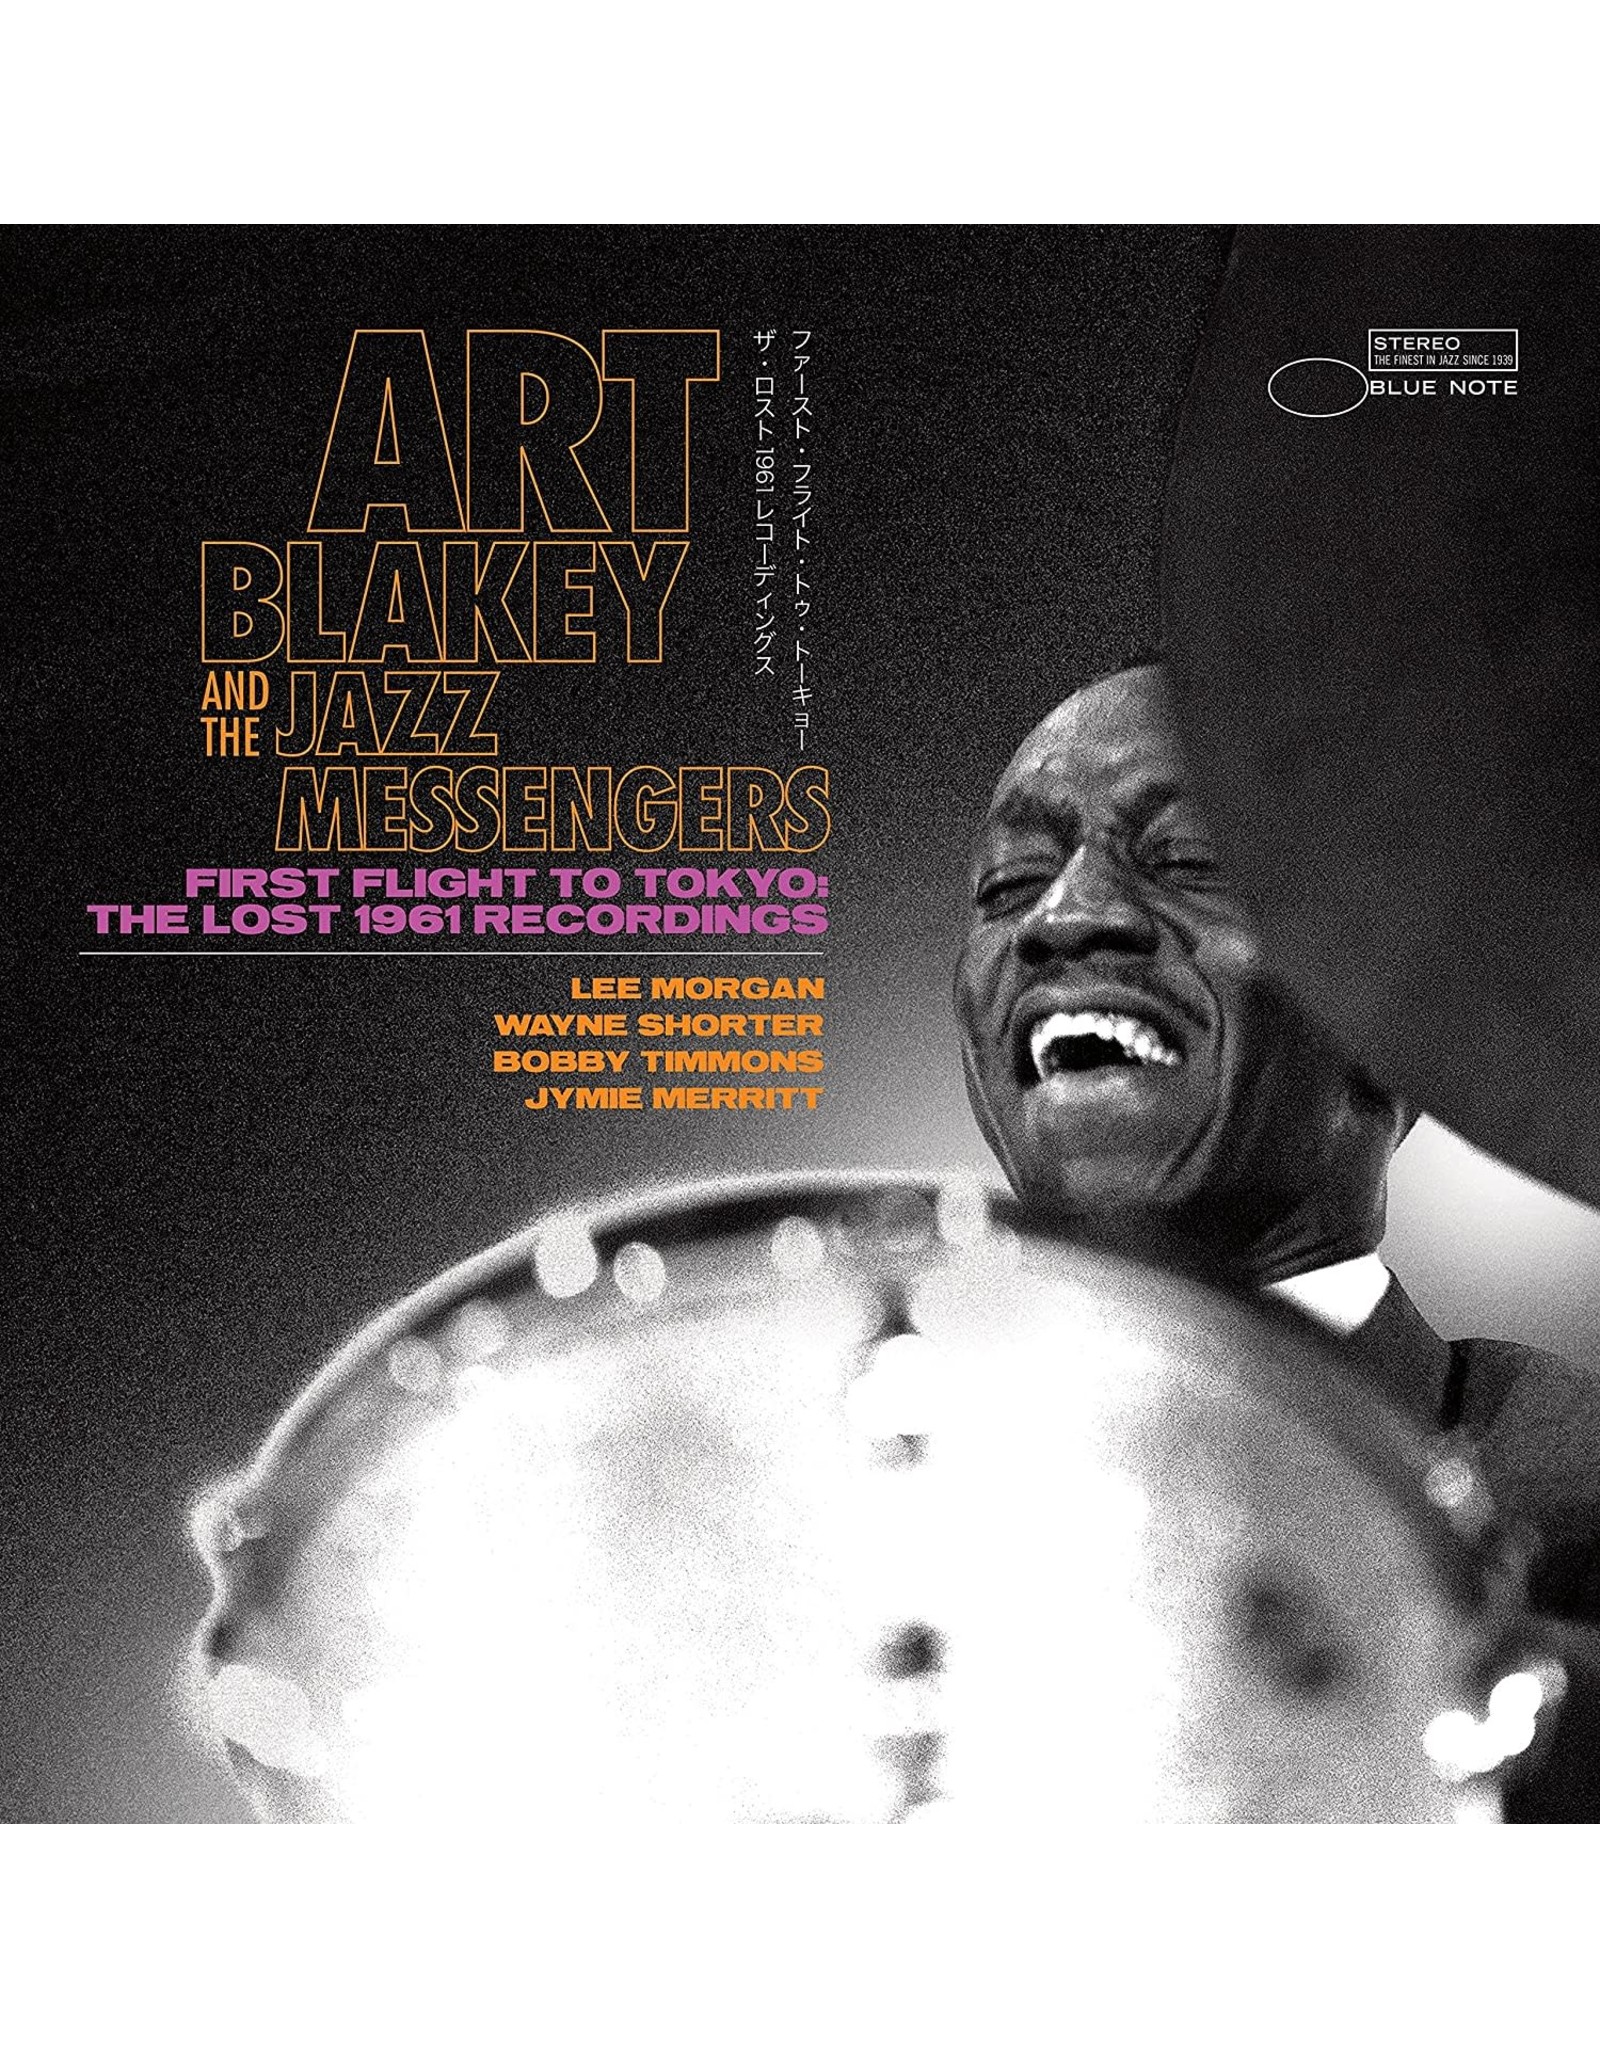 Art Blakey - First Flight To Tokyo (The Lost 1961 Recordings)